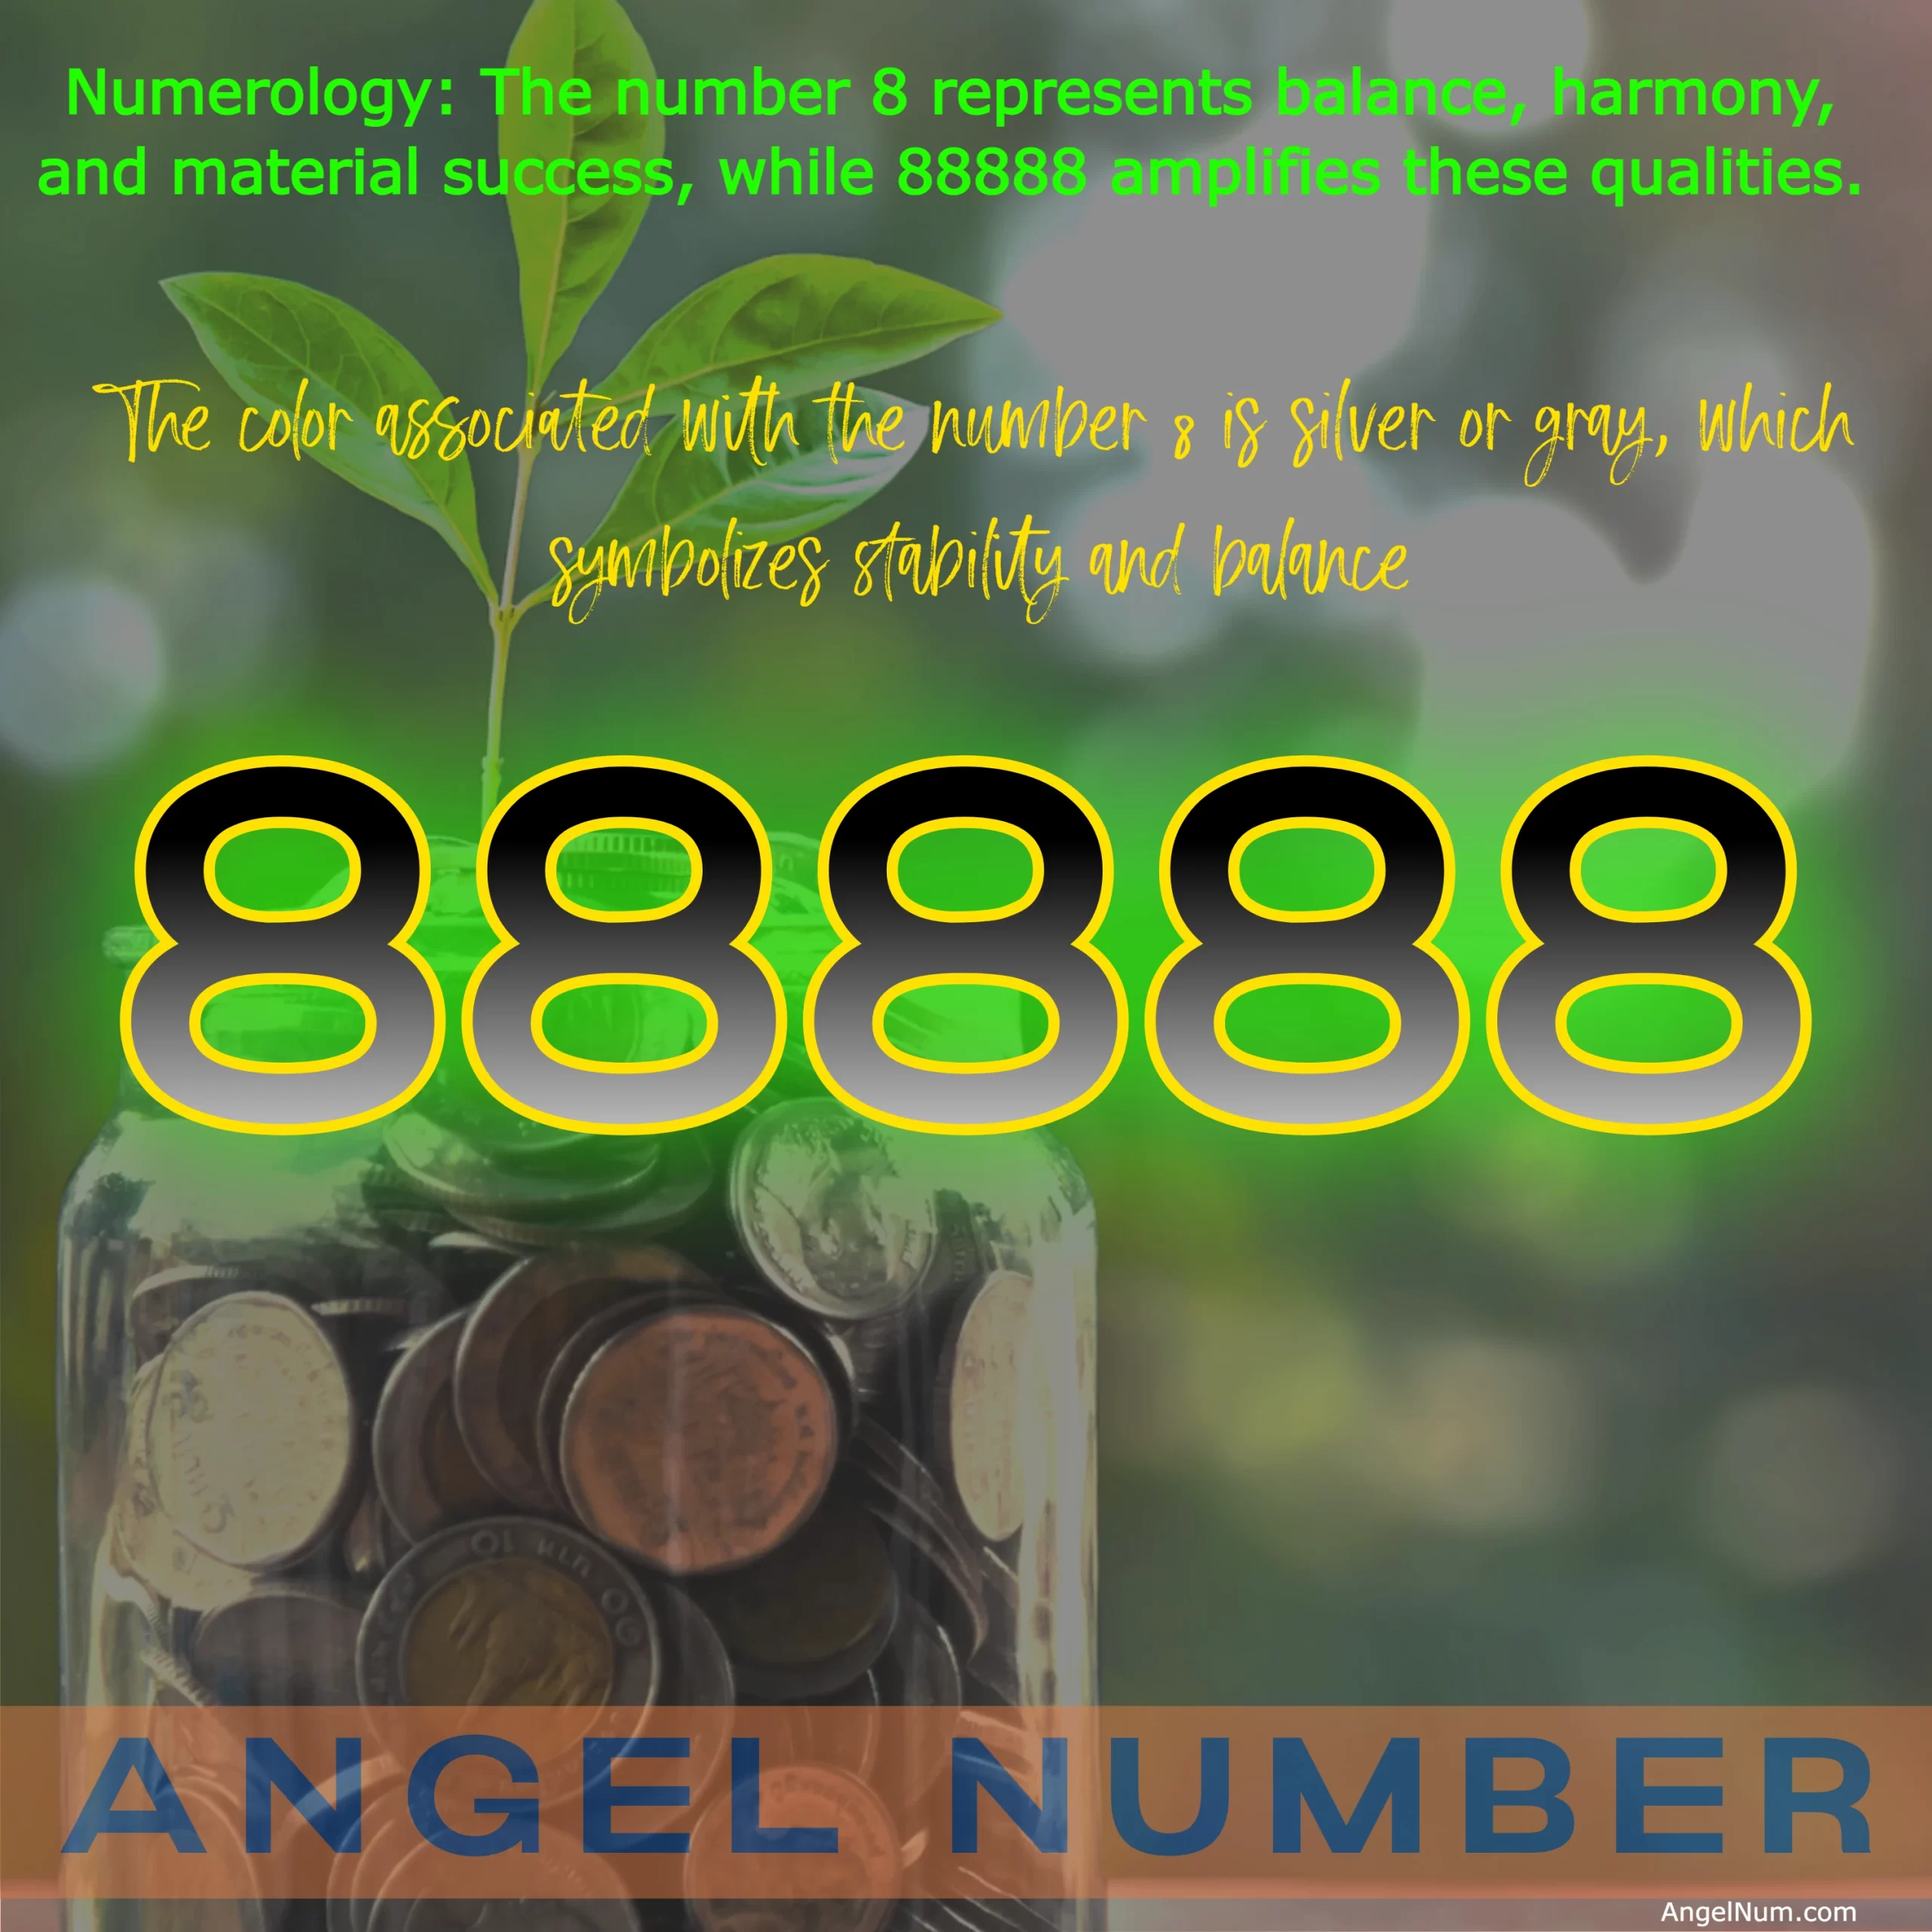 Angel Number 88888: The Ultimate Symbol of Abundance and Spiritual Growth